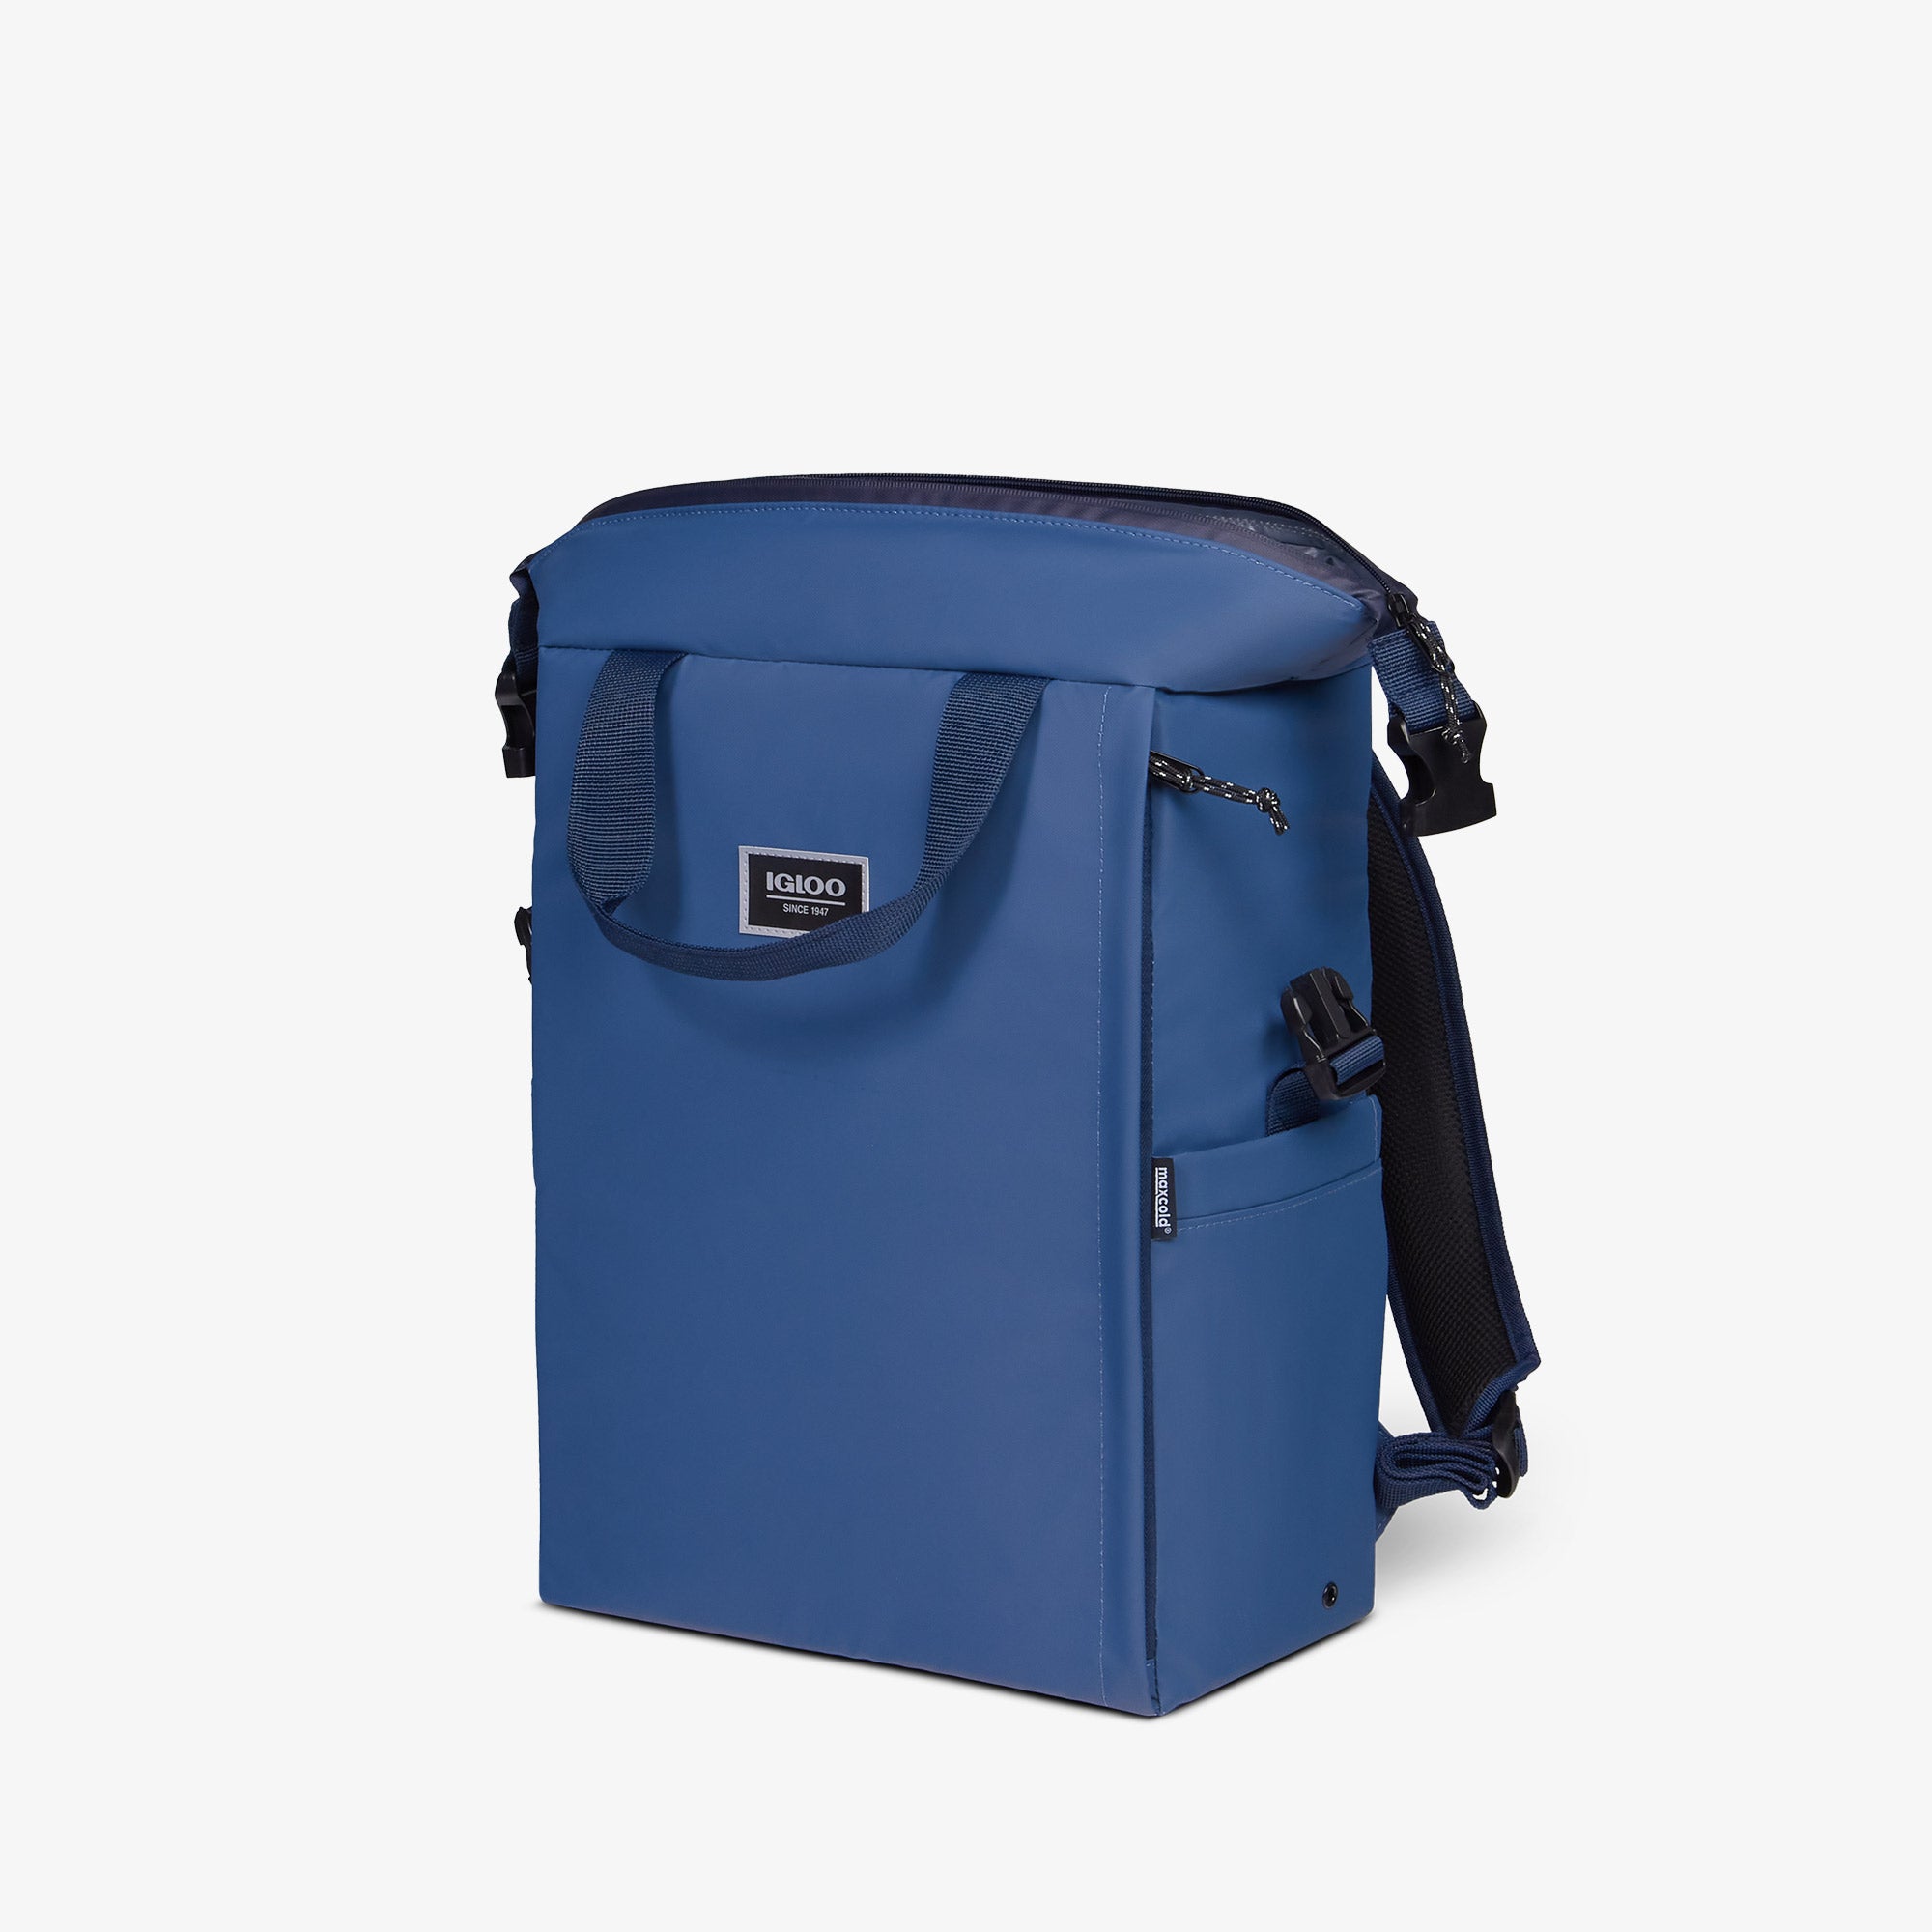 South Coast Snapdown 24-Can Backpack | Igloo